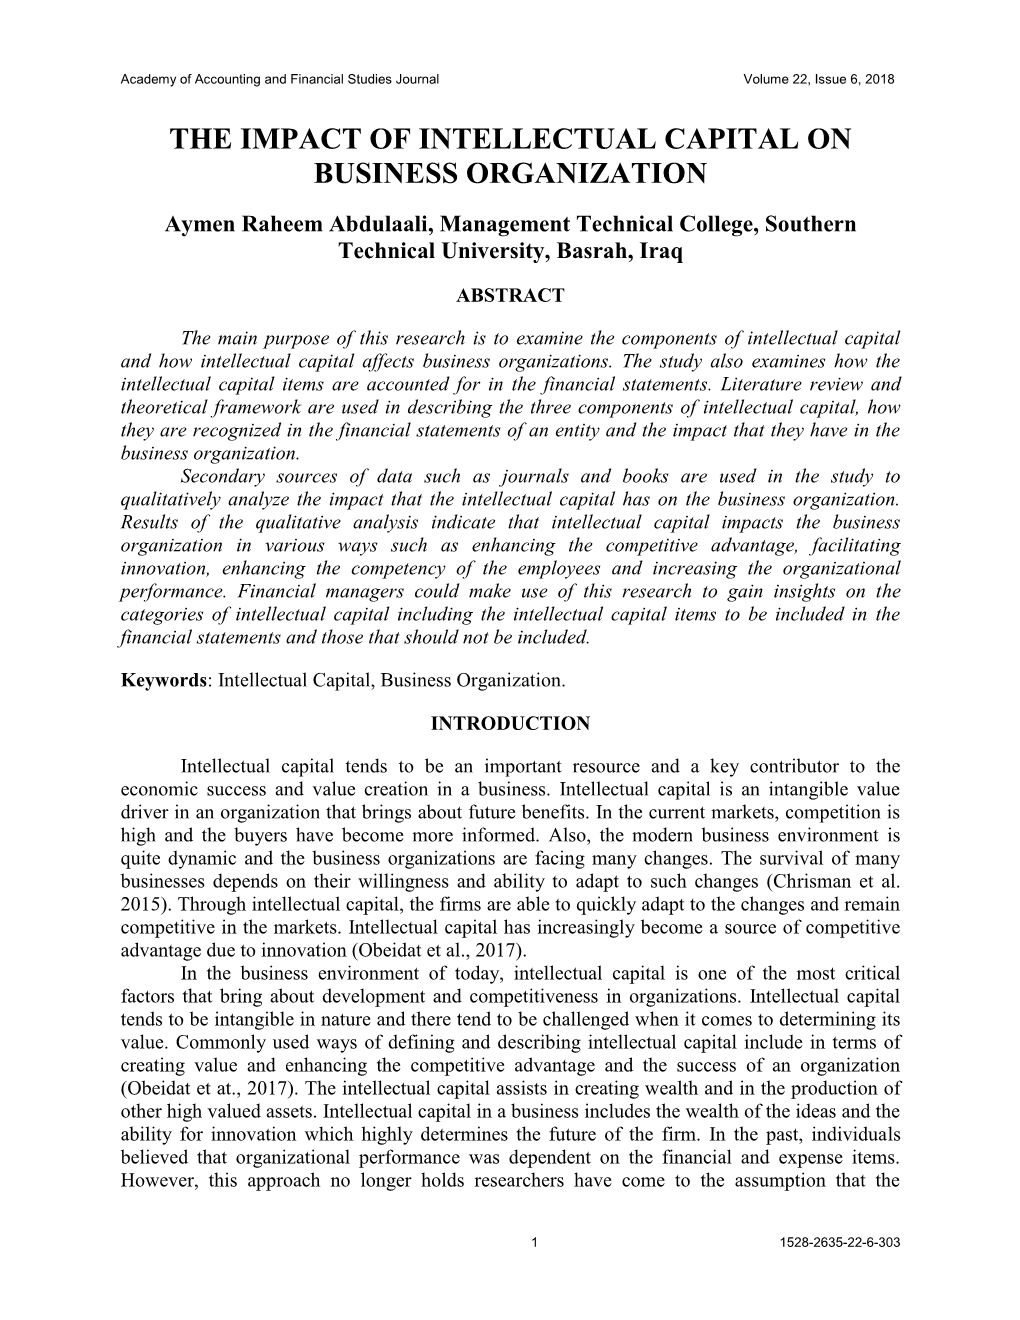 The Impact of Intellectual Capital on Business Organization